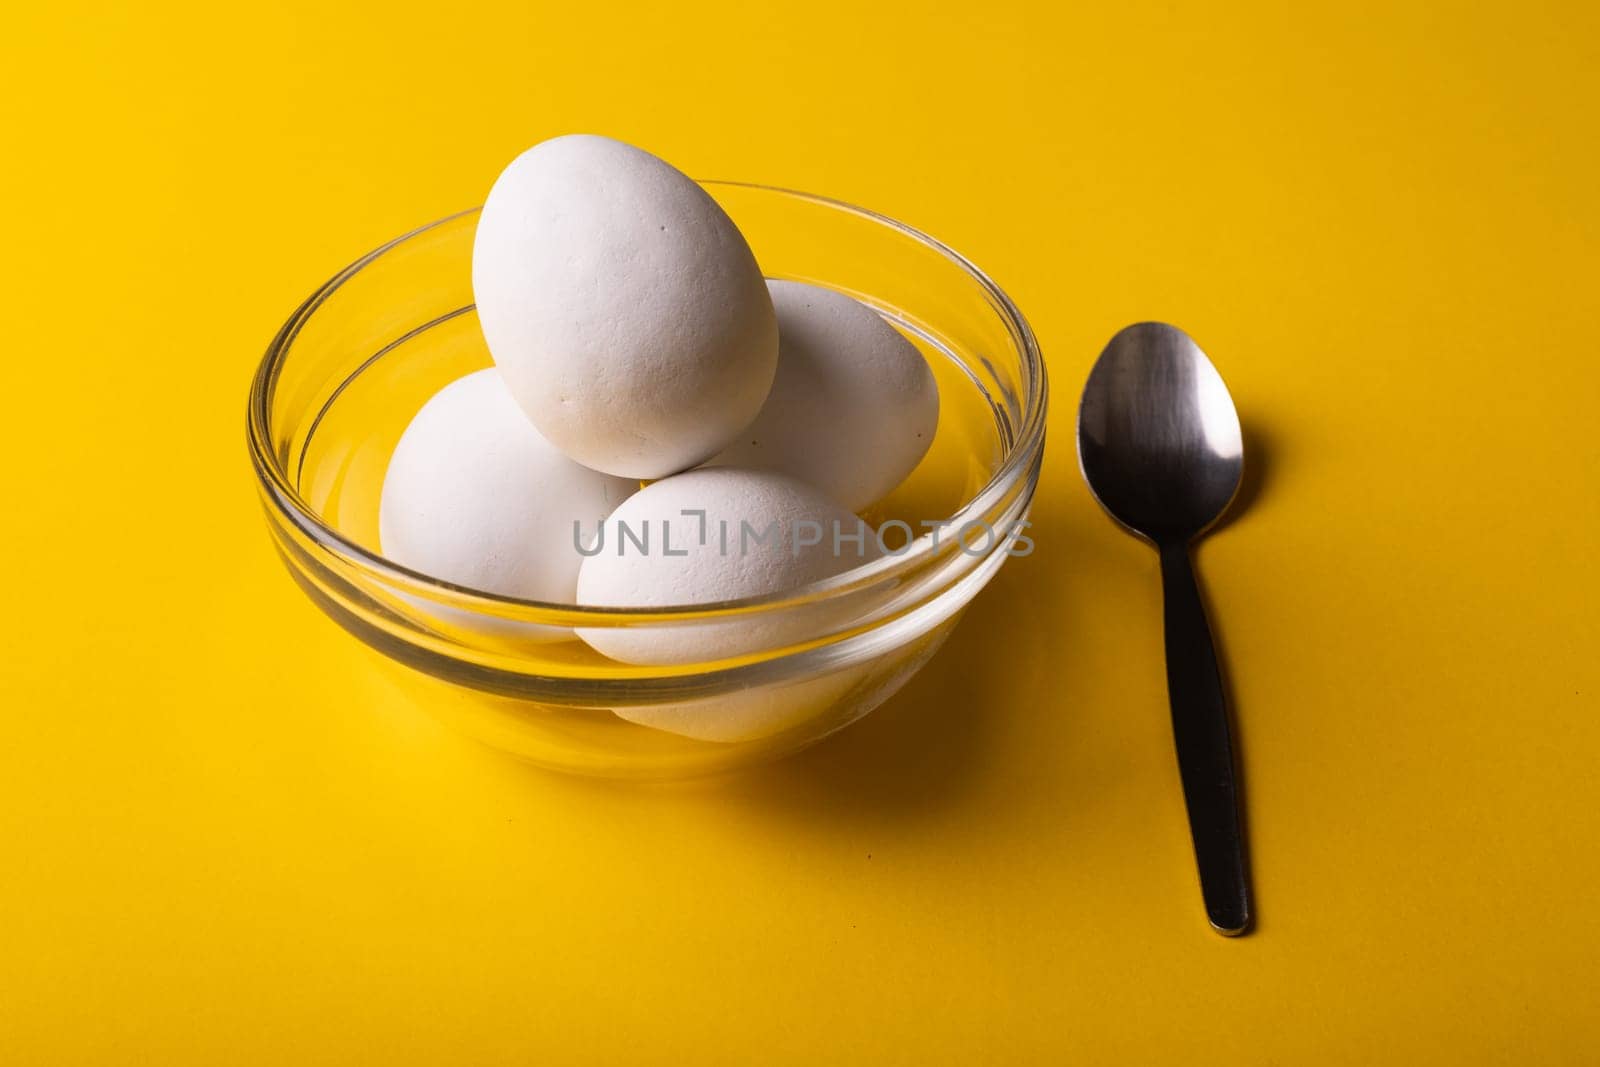 High angle close-up of fresh white eggs in glass bowl by spoon on yellow background. unaltered, food, healthy eating concept.